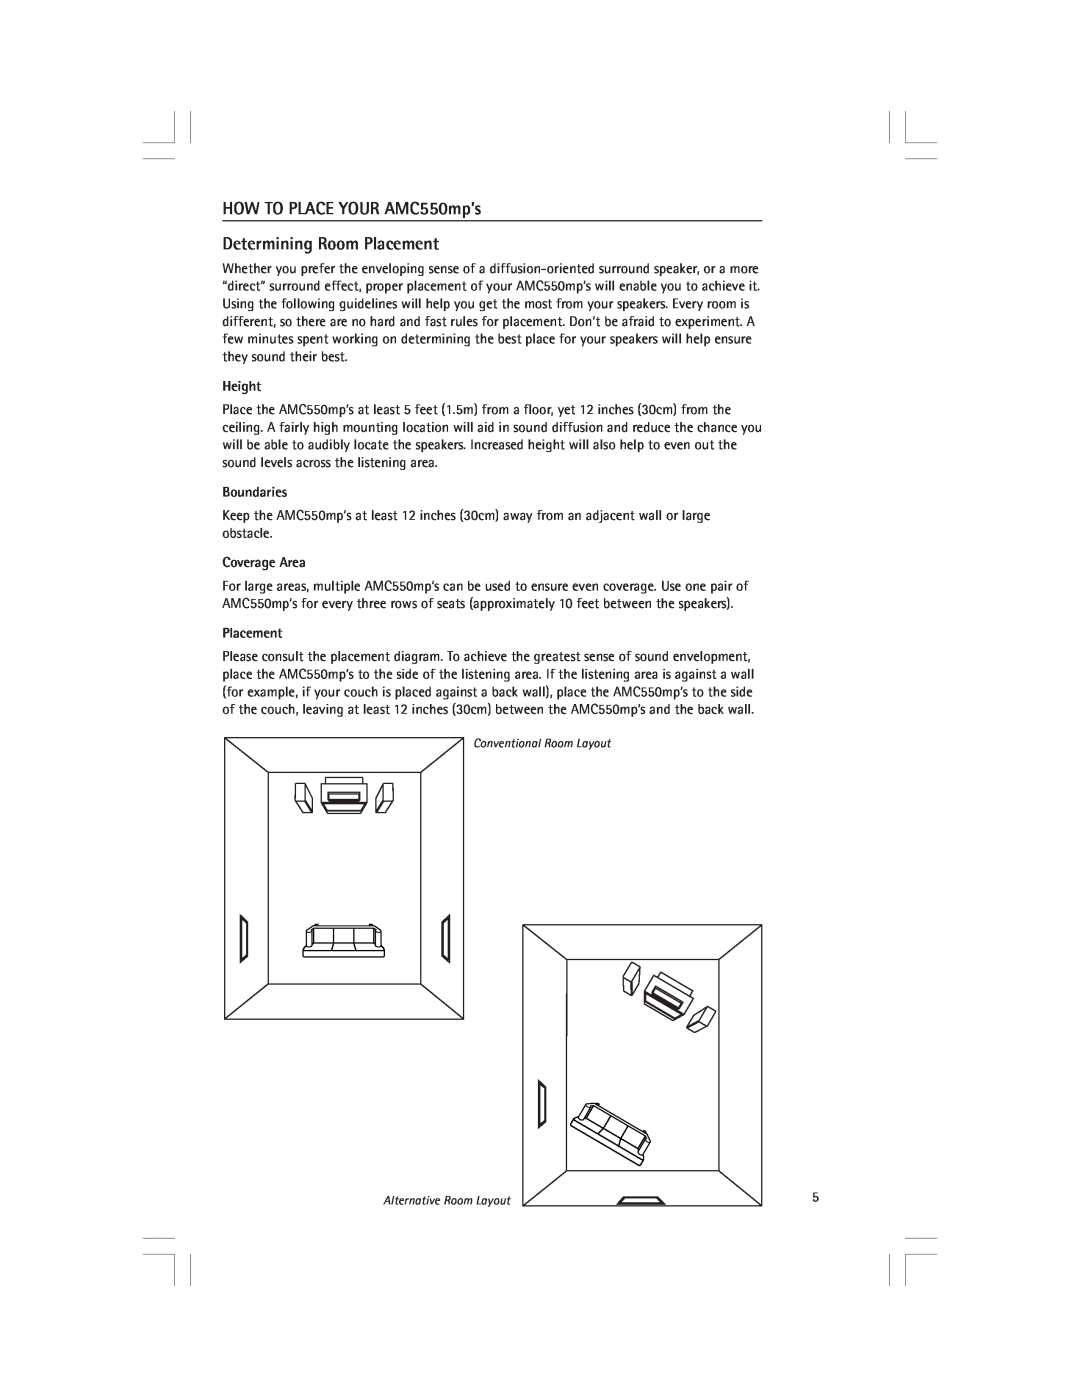 Snell Acoustics owner manual HOW TO PLACE YOUR AMC550mp’s, Determining Room Placement, Height, Boundaries, Coverage Area 